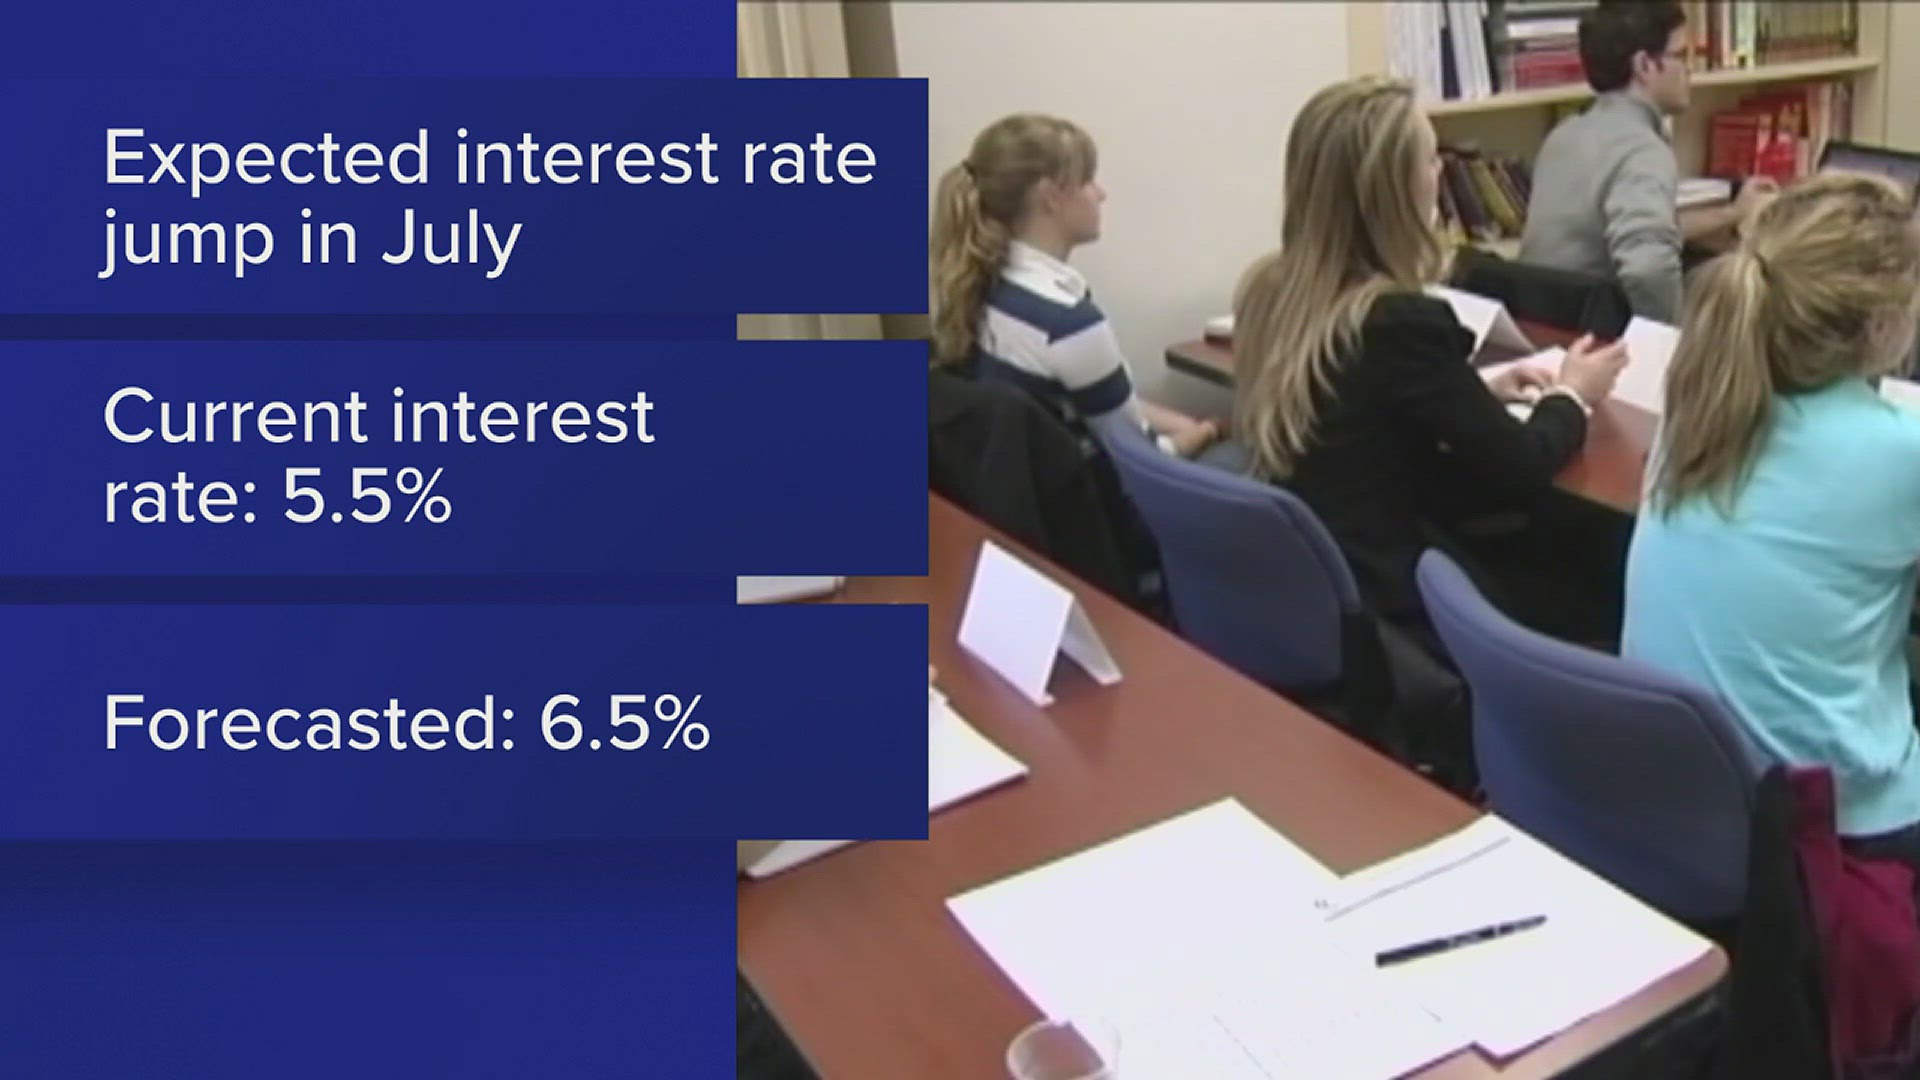 The interest rate is expected to hit 6.5% in July.